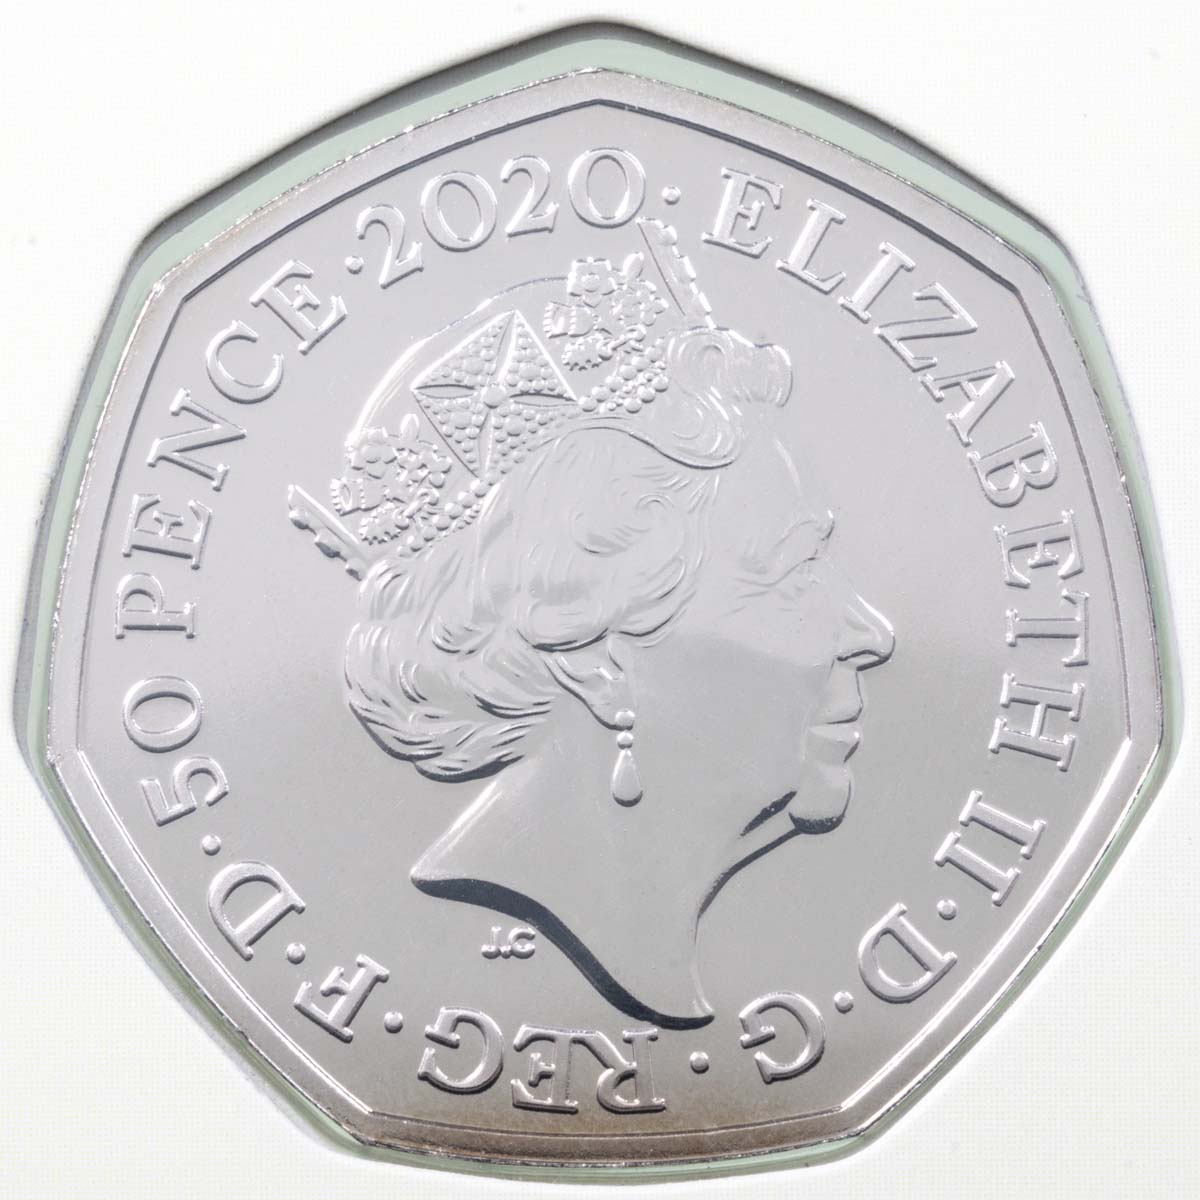 UK20BWBU 2020 Brexit EU Withdrawal Fifty Pence Brilliant Uncirculated Coin In Folder Obverse